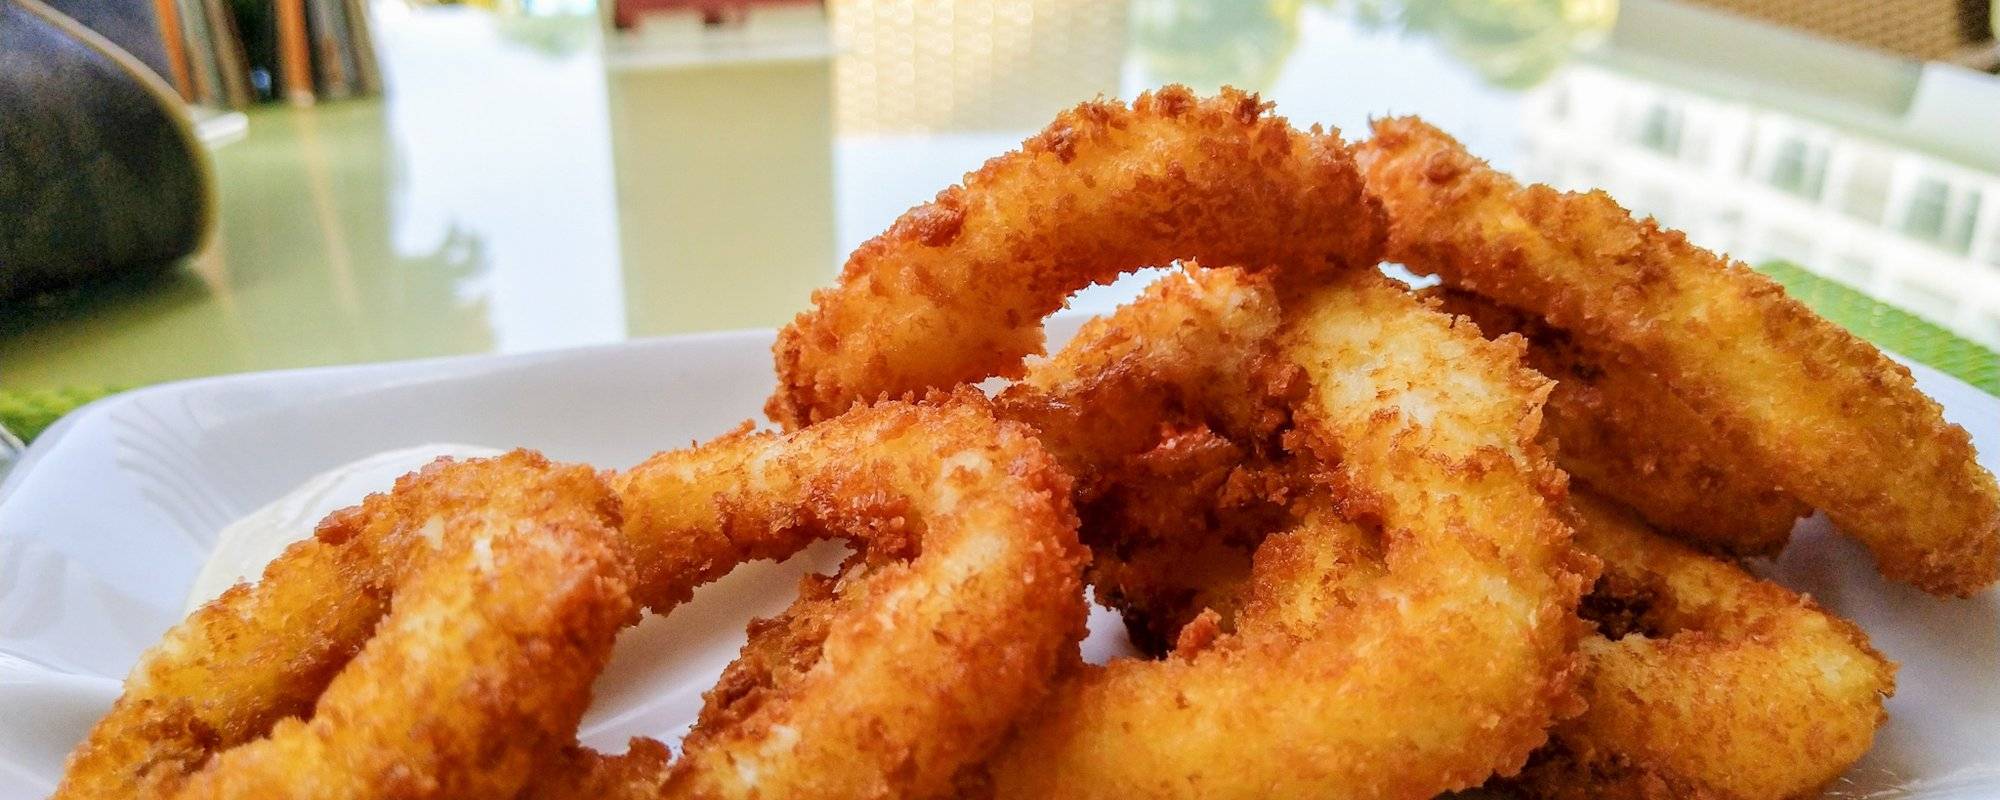 Marco Polo Hotel's Calamari Might Just Be The Best Calamari In Town! 